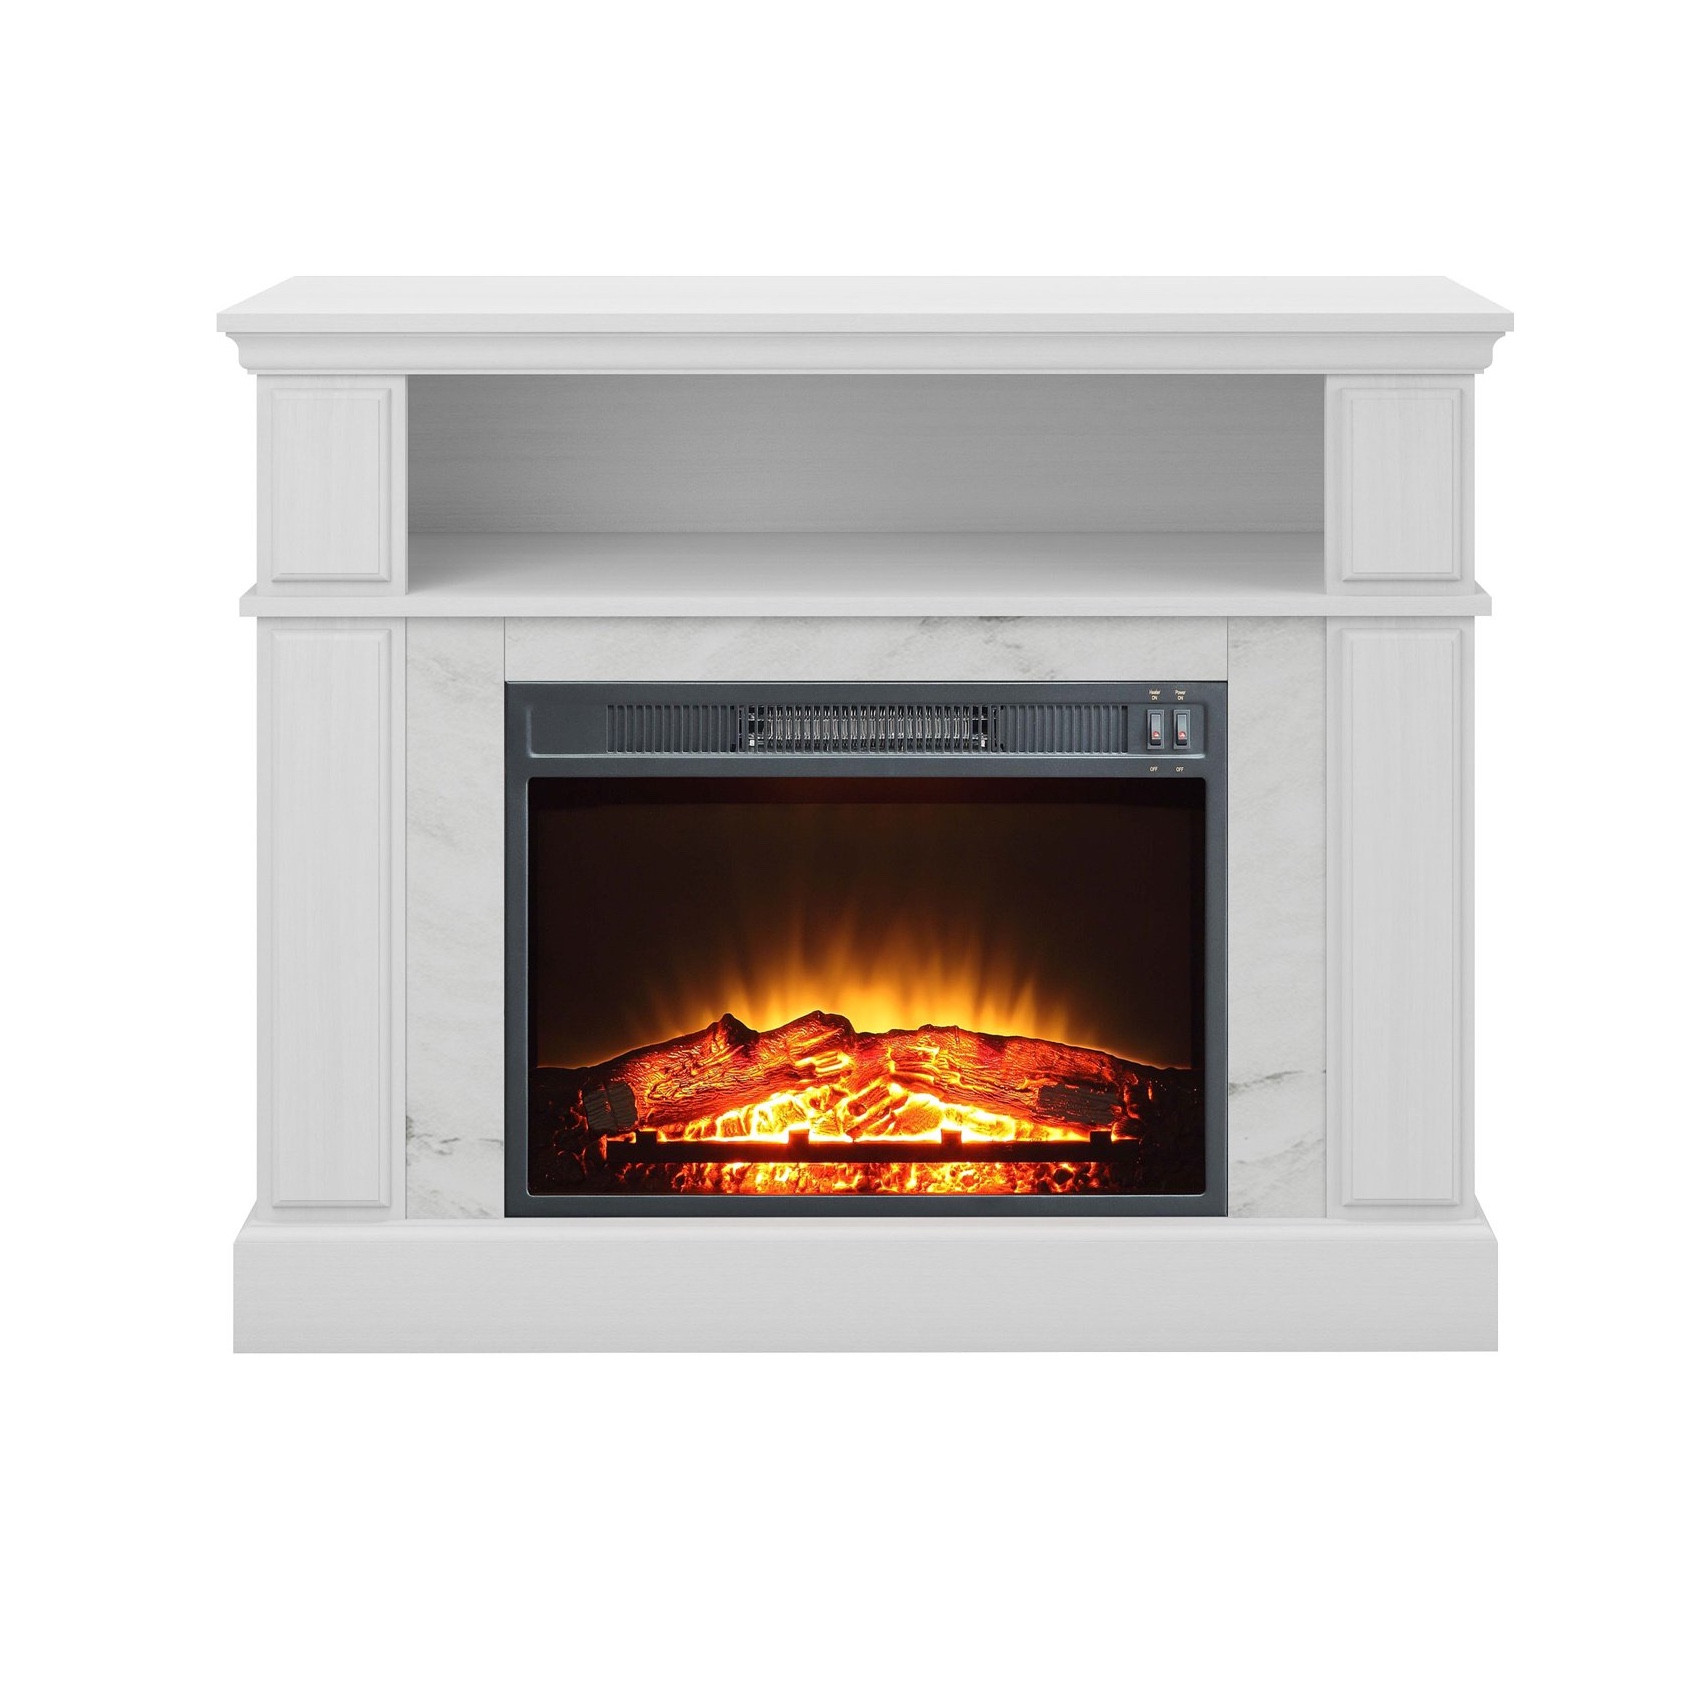 Mainstays Loring Media Fireplace for TVs up to 48", White